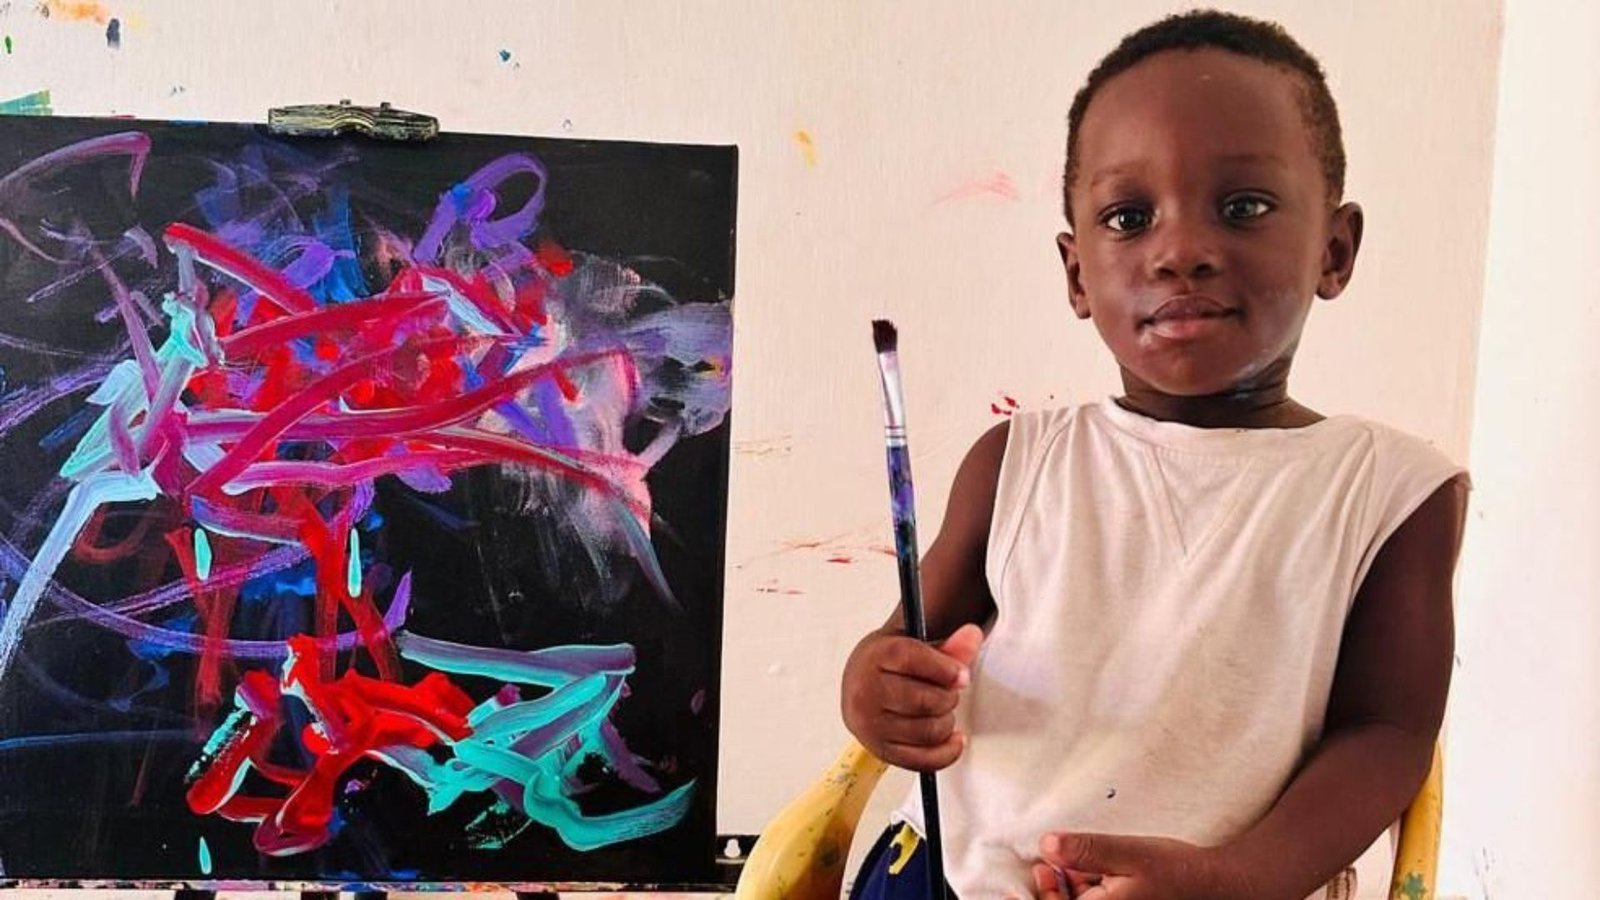 1-year-old toddler makes history as world’s youngest male artist